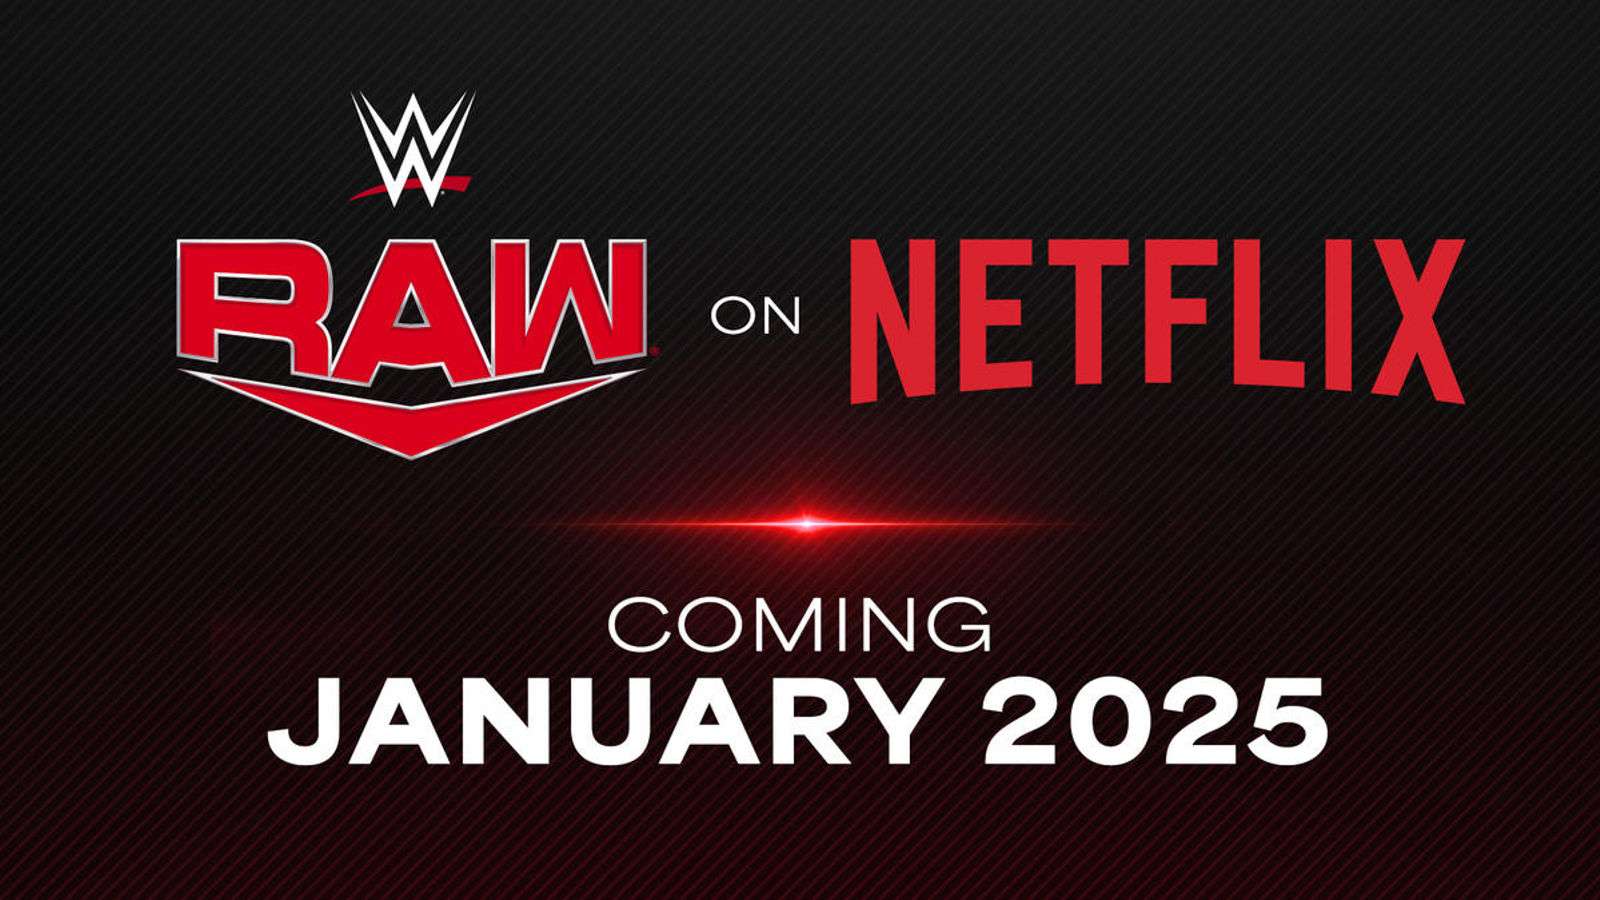 The logos of Raw and Netflix.